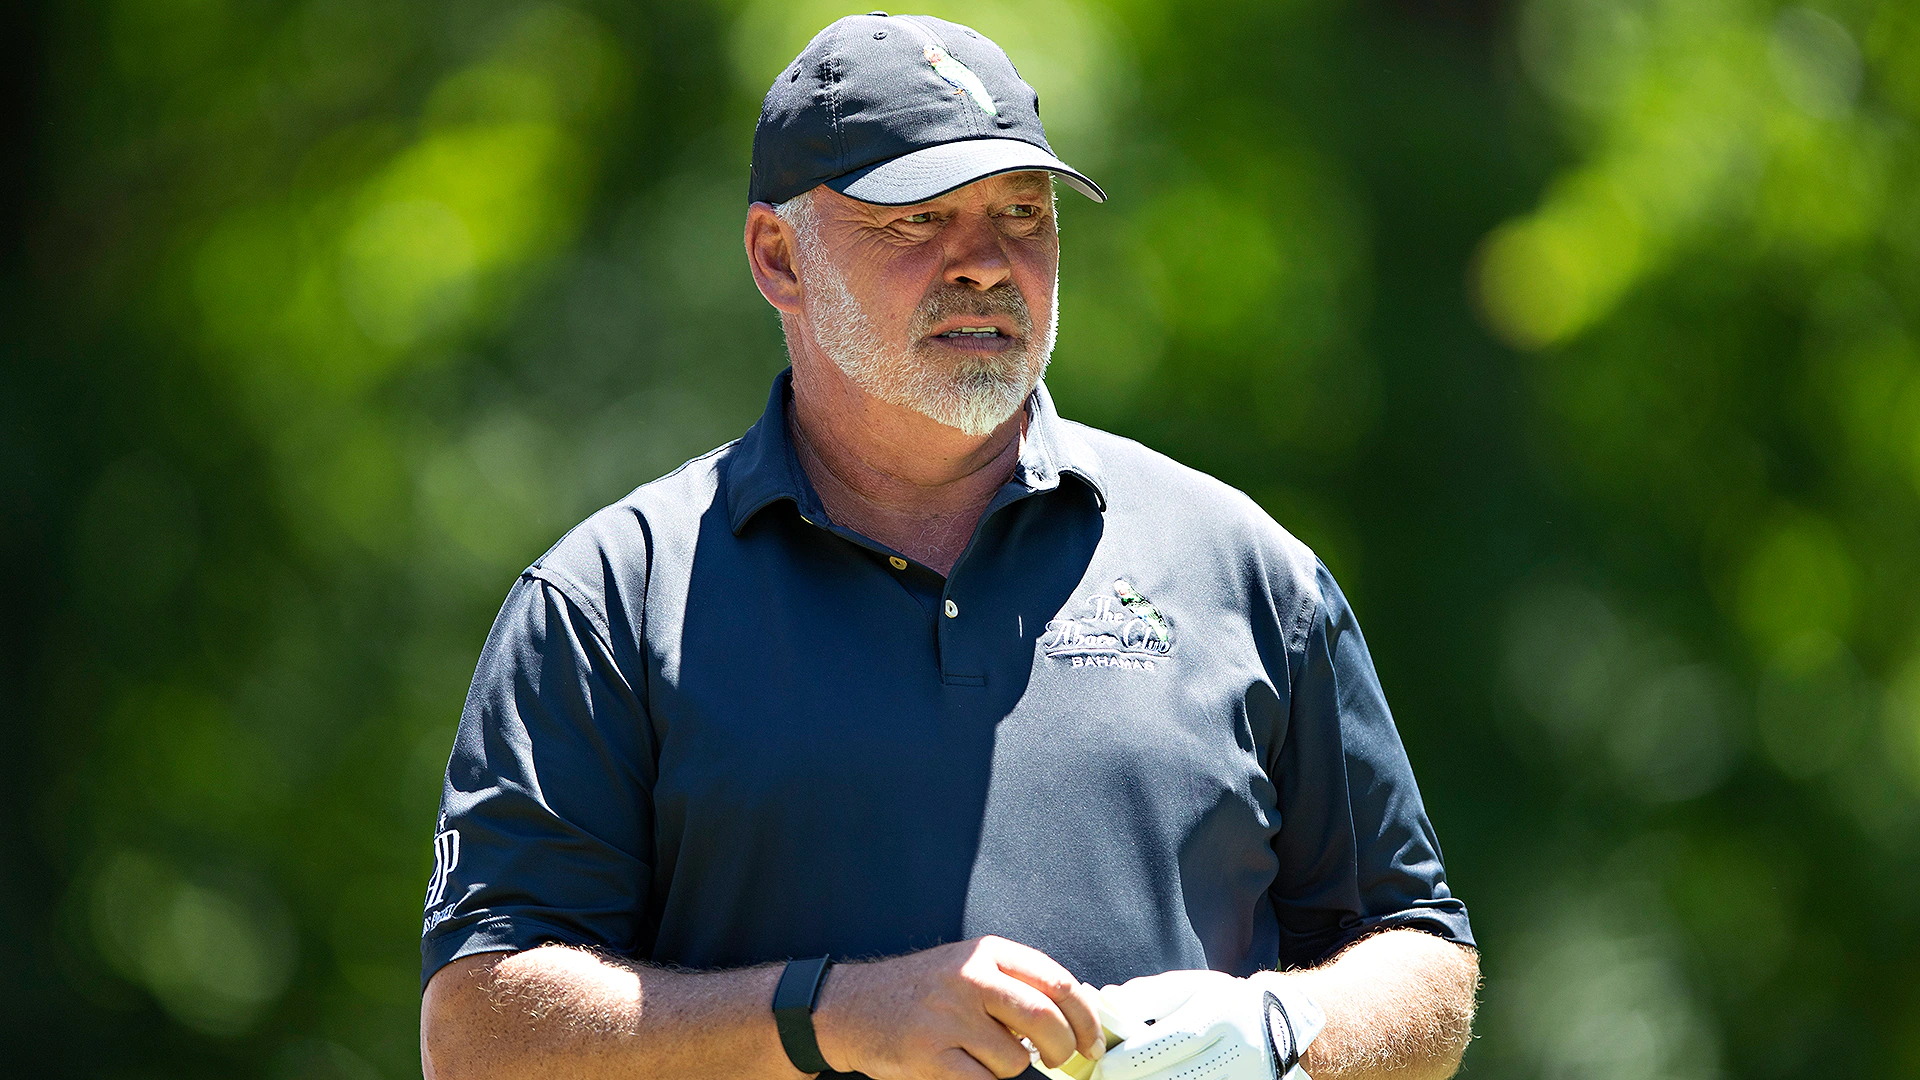 Darren Clarke shoots 66 to lead Regions Tradition after opening round